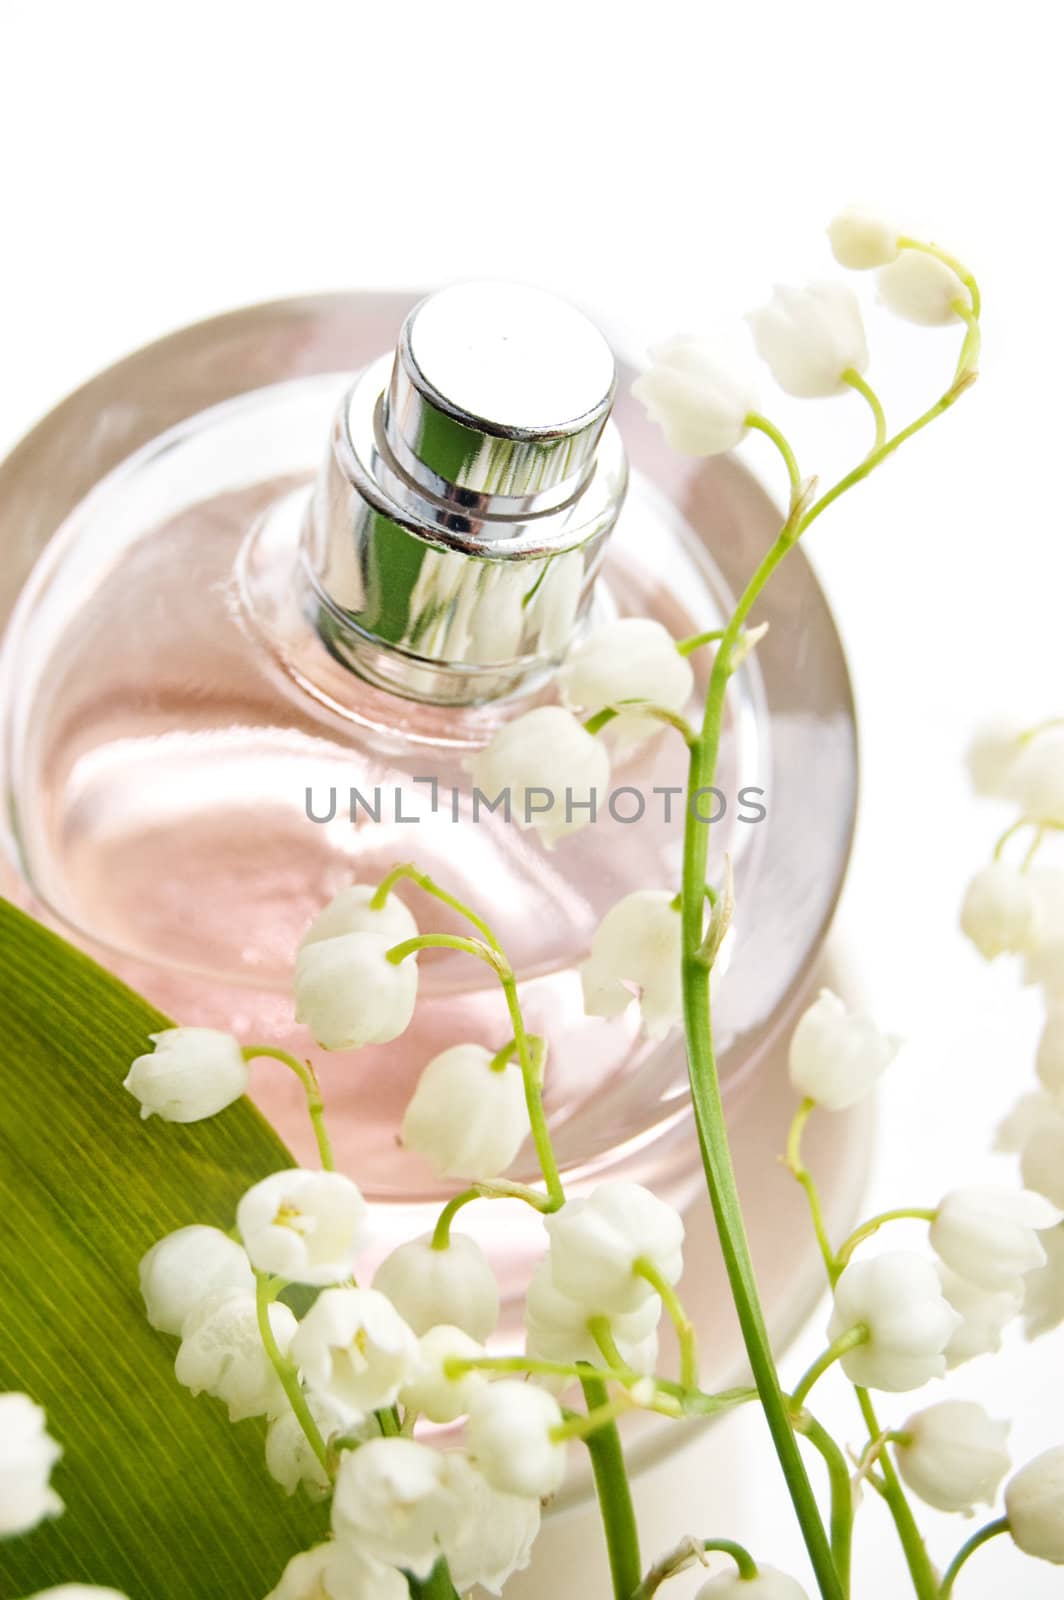 Bottle of perfume and lilies-of-the-valley